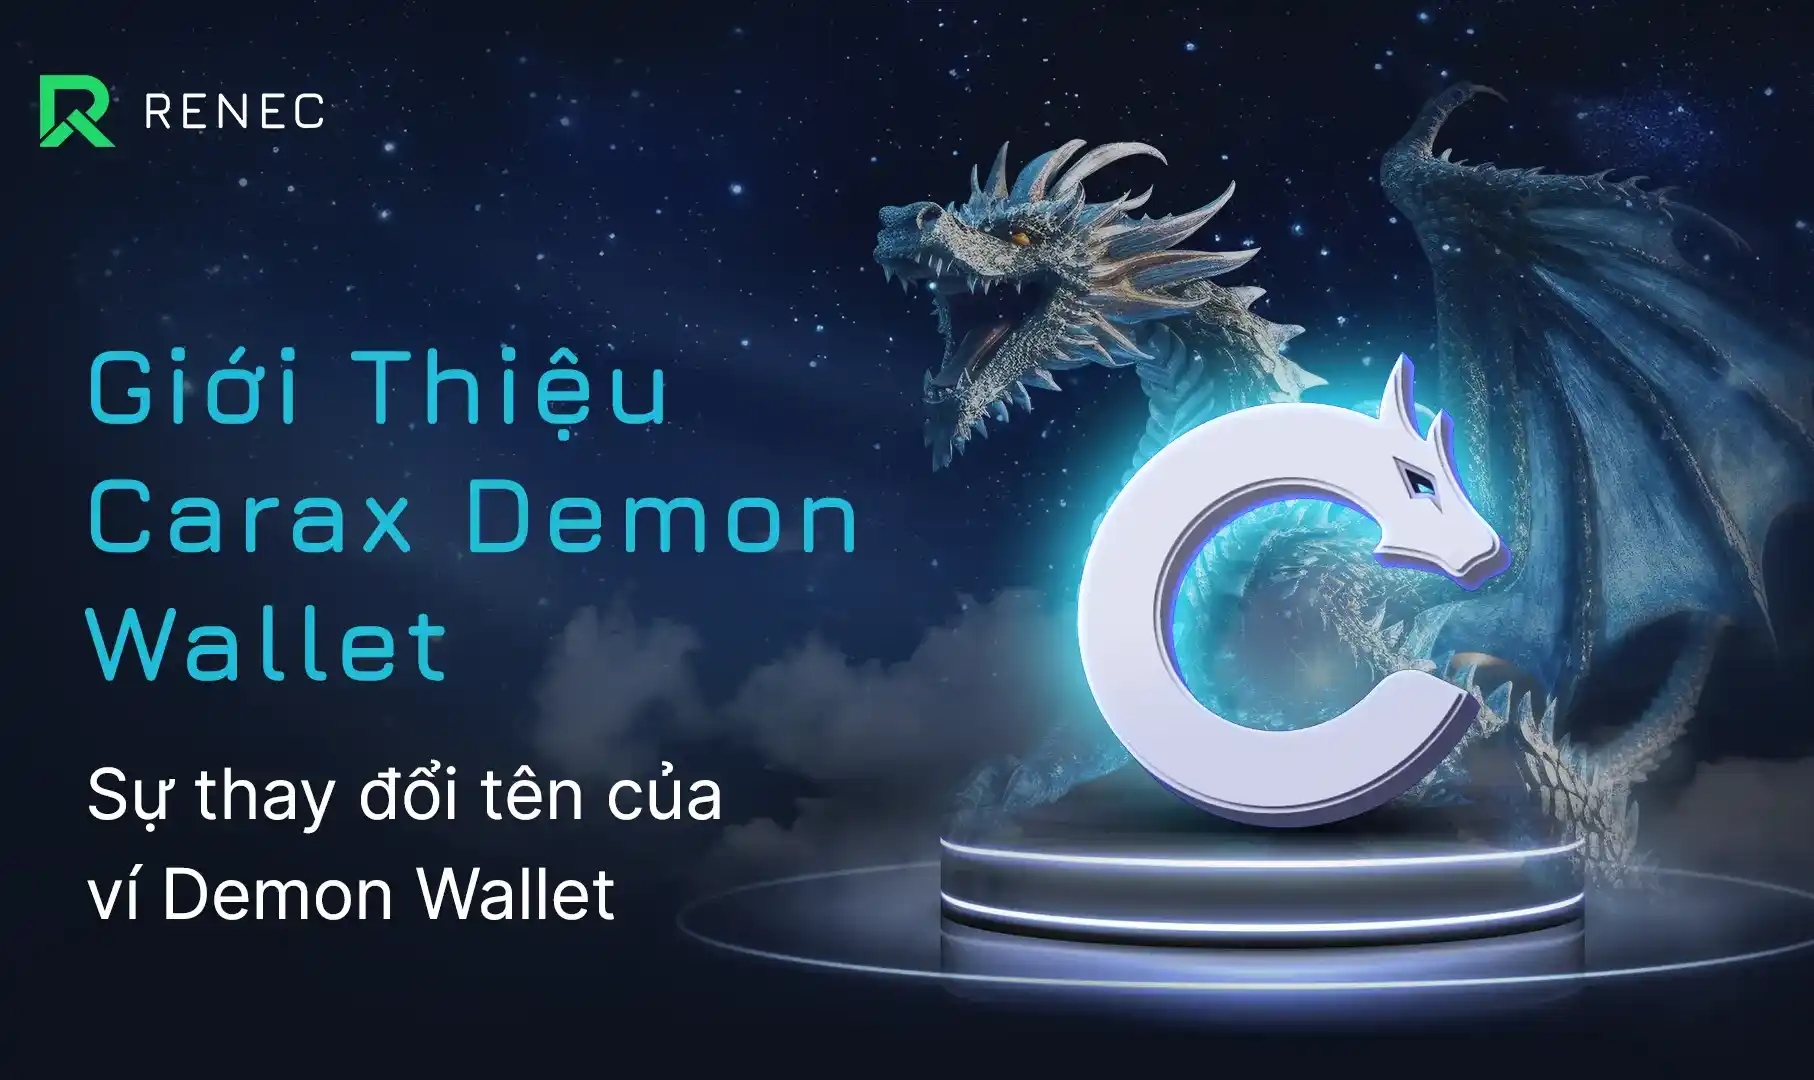 Introducing Carax Demon Wallet: The Name Transformation of our Demon Wallet avatar